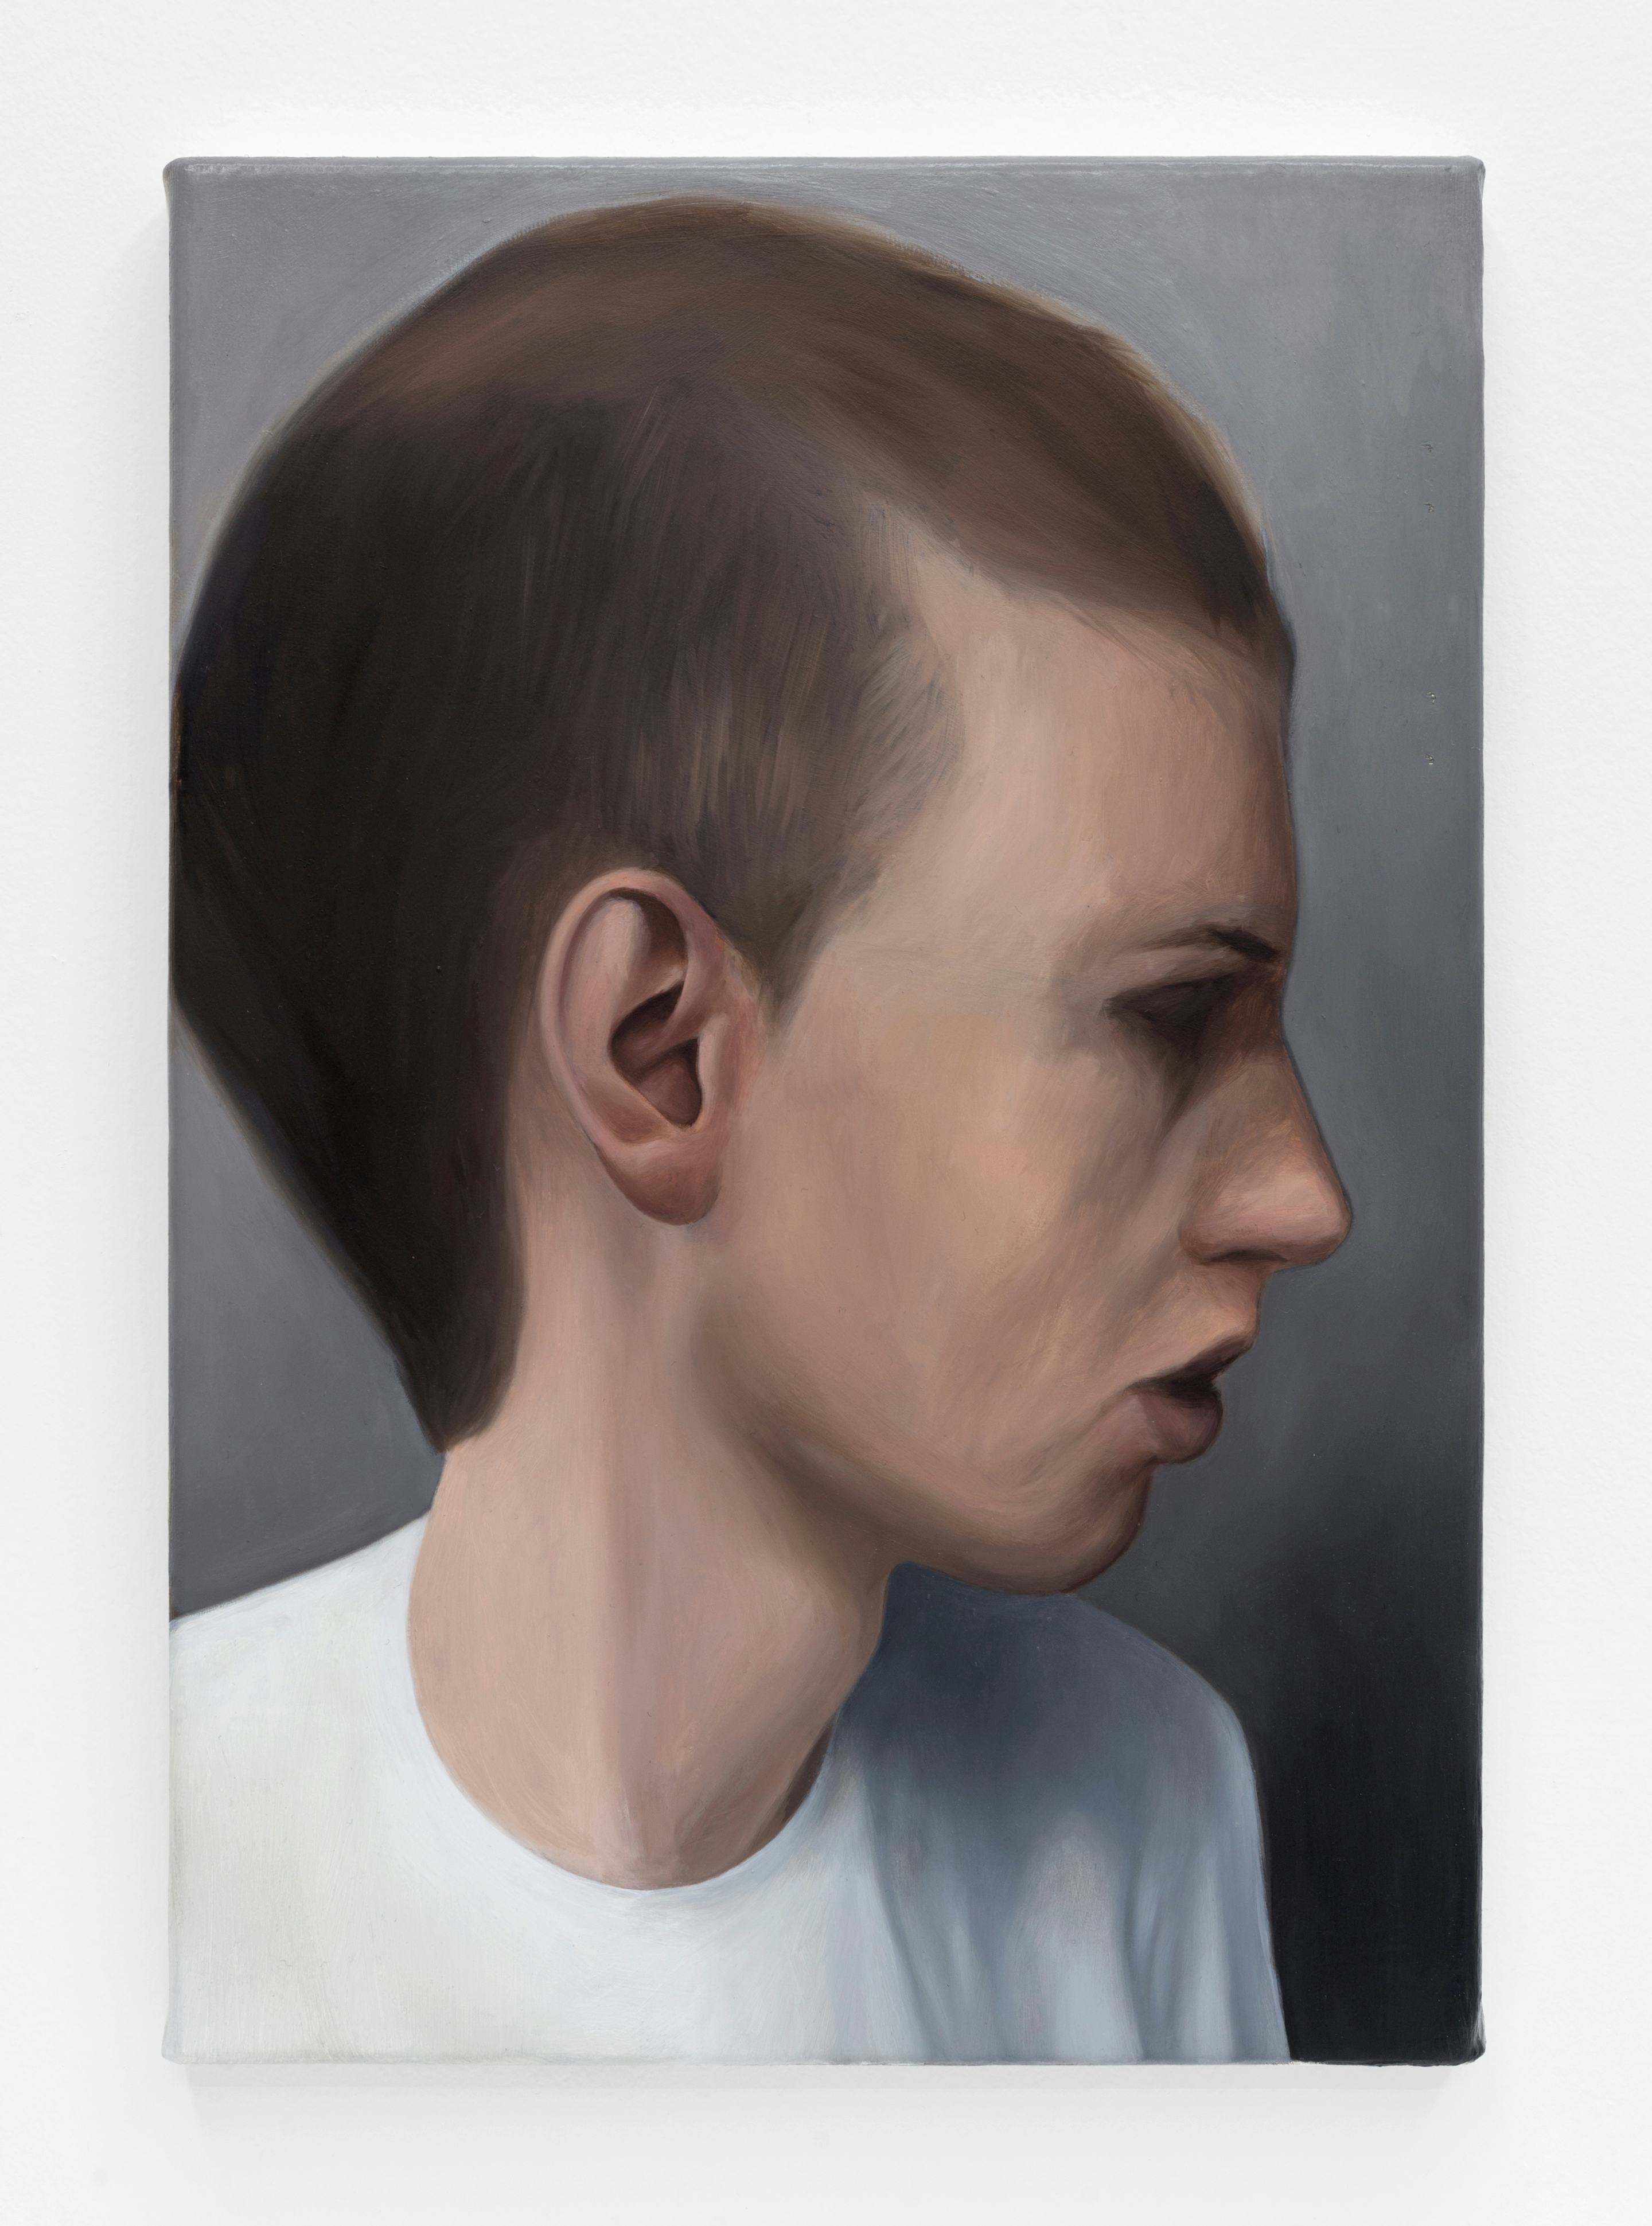 Portrait of A Young Man #7, 2023 

Oil on canvas

13.8h x 9.4w inches (35h x 24w cm)